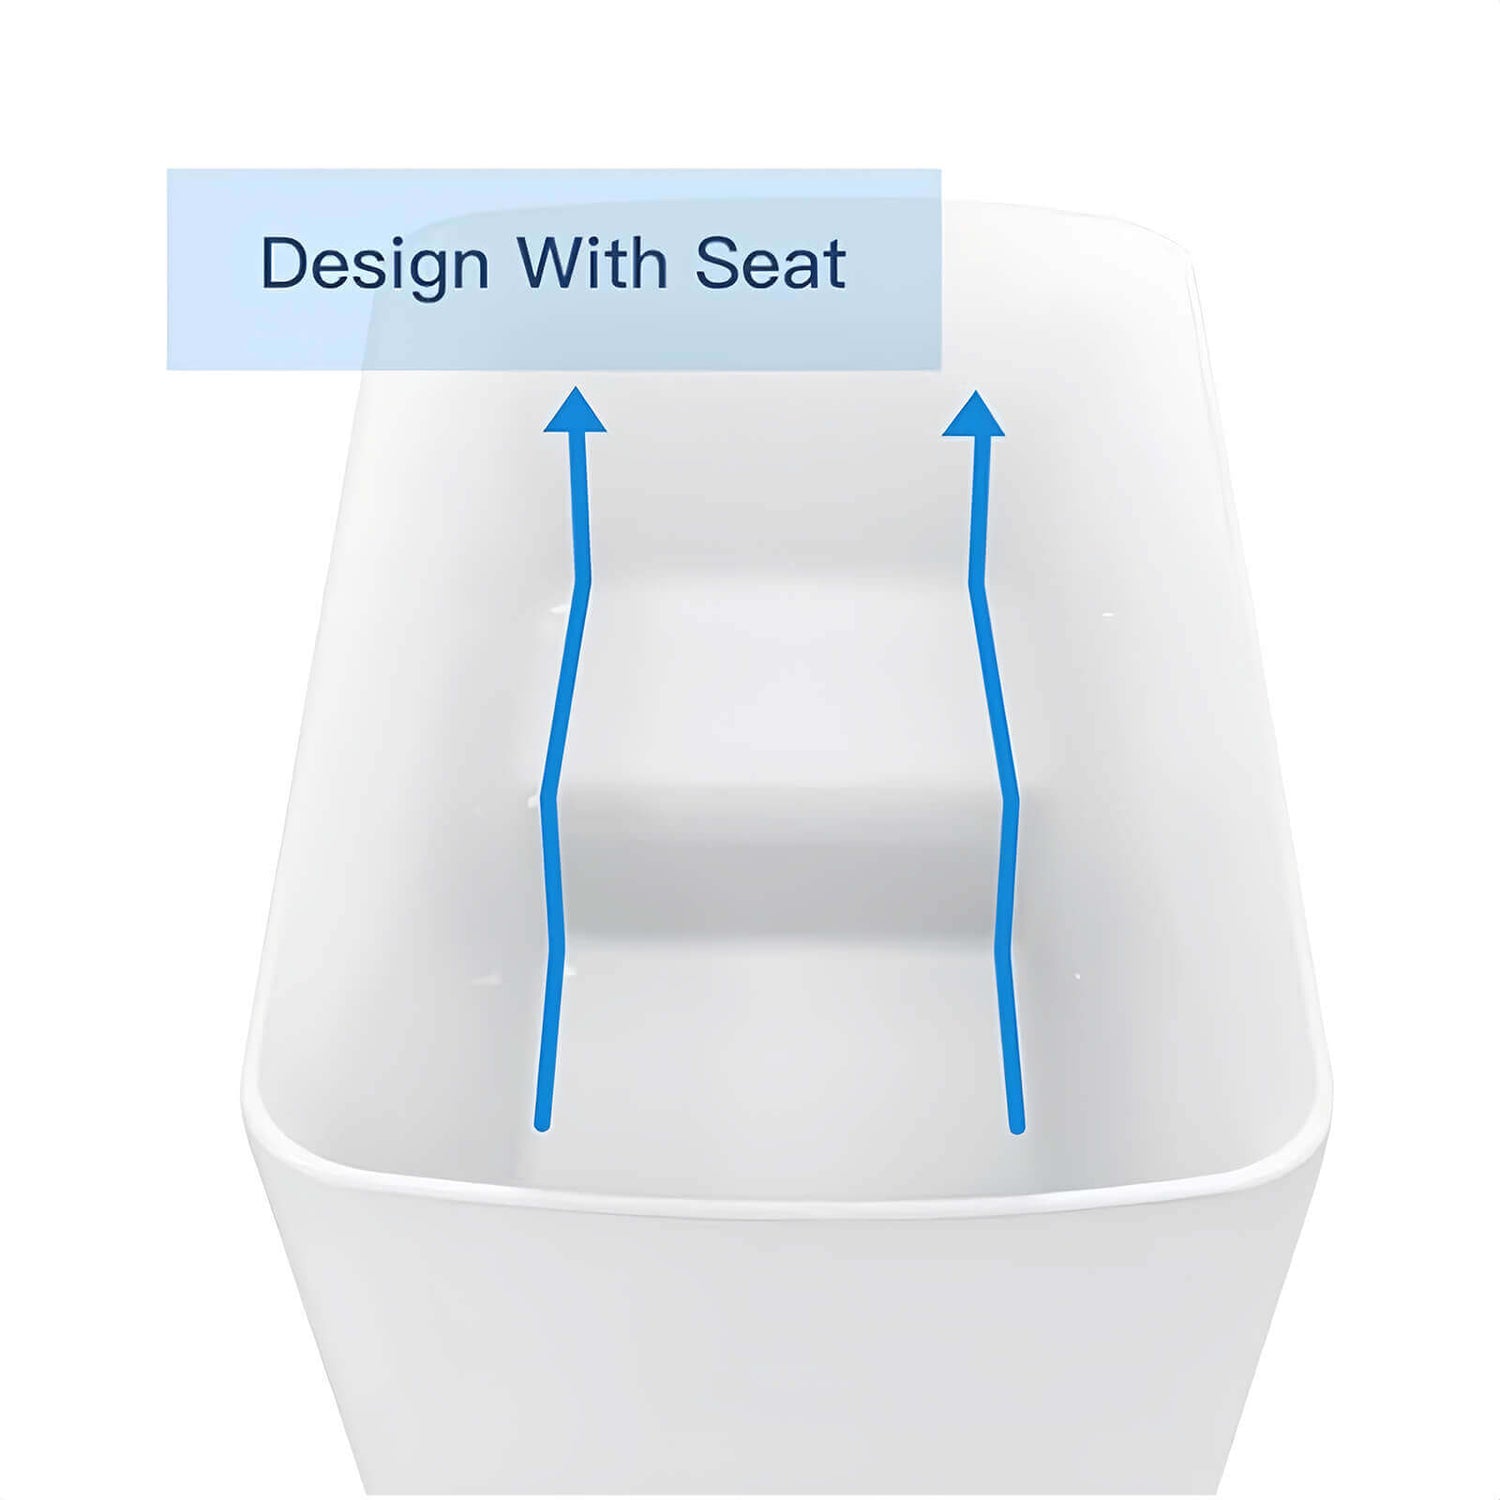 Seat slope diagram for a 49 inch acrylic bathtub with integrated seat